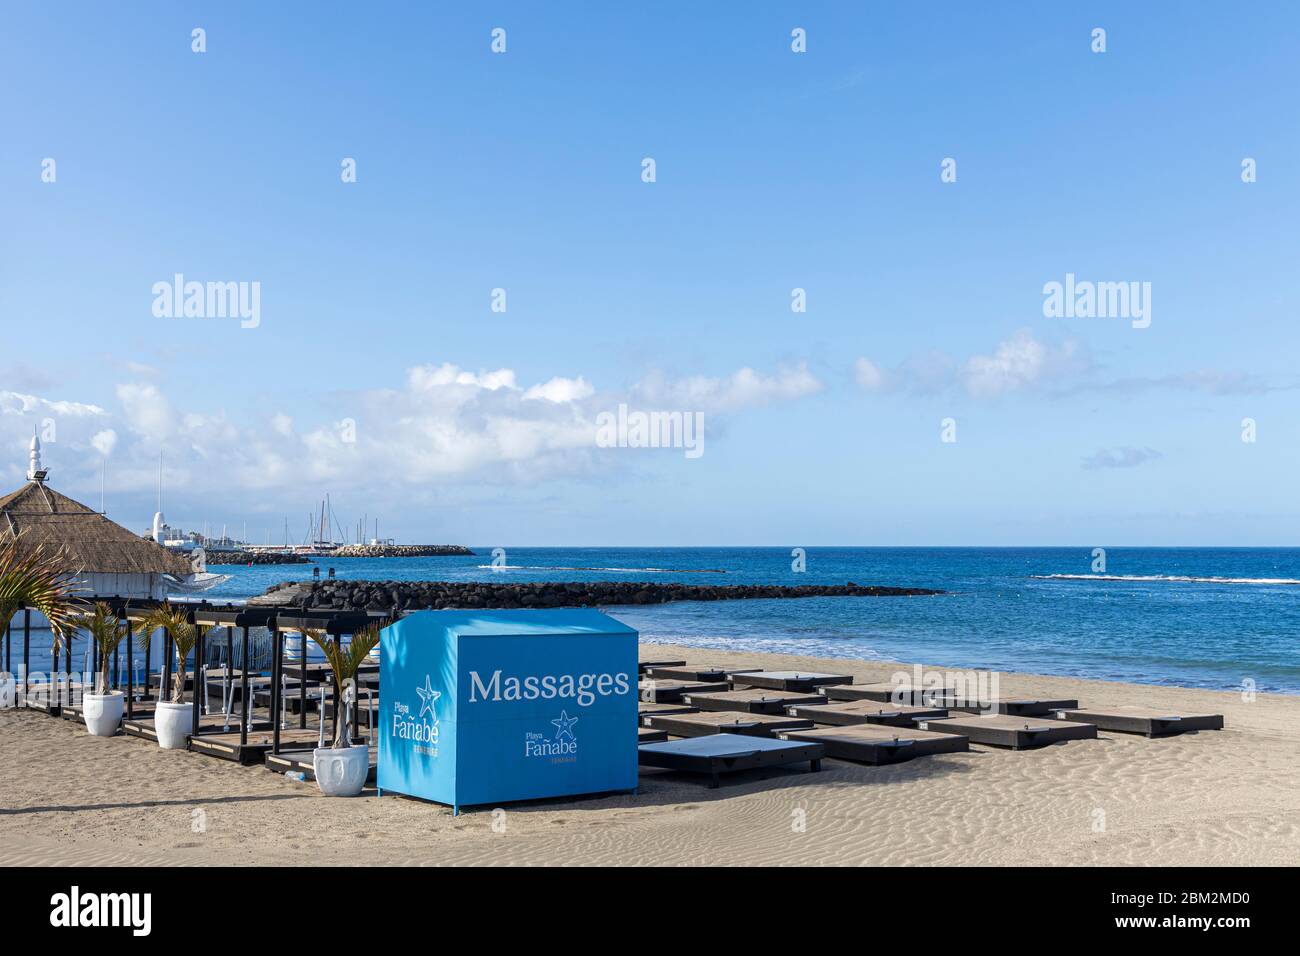 Playa Fanabe massage business and sunbeds deserted, closed during the Covid 19 State of Emergency in Tenerife, Canary Islands, Spain Stock Photo